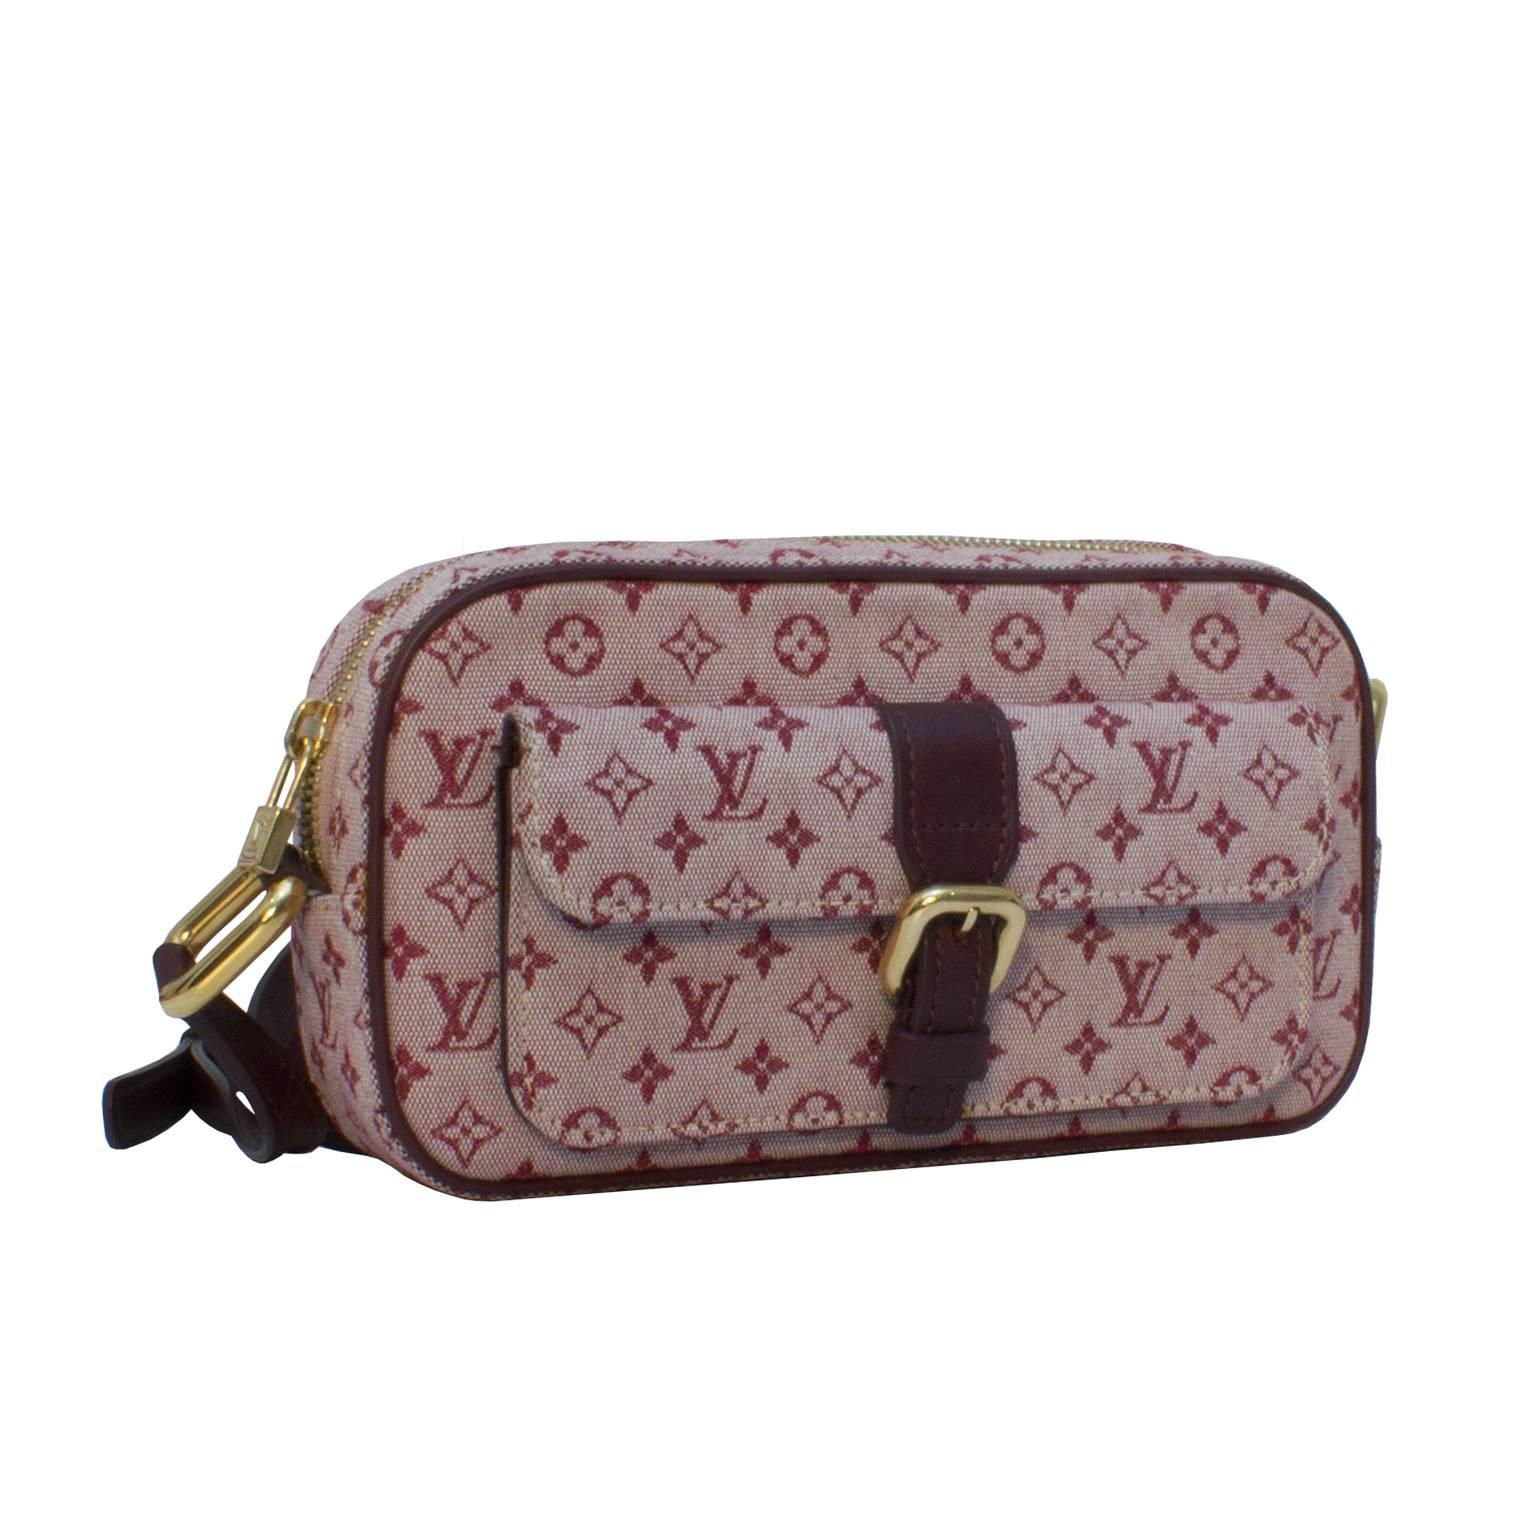 Chic Louis Vuitton bordeau monogram mini camera bag features a canvas body, a dark brown leather cross body strap, leather trimming, and a front flap pocket with a leather buckle. Beige canvas interior lining. Top zip closure and gold tone hardware.